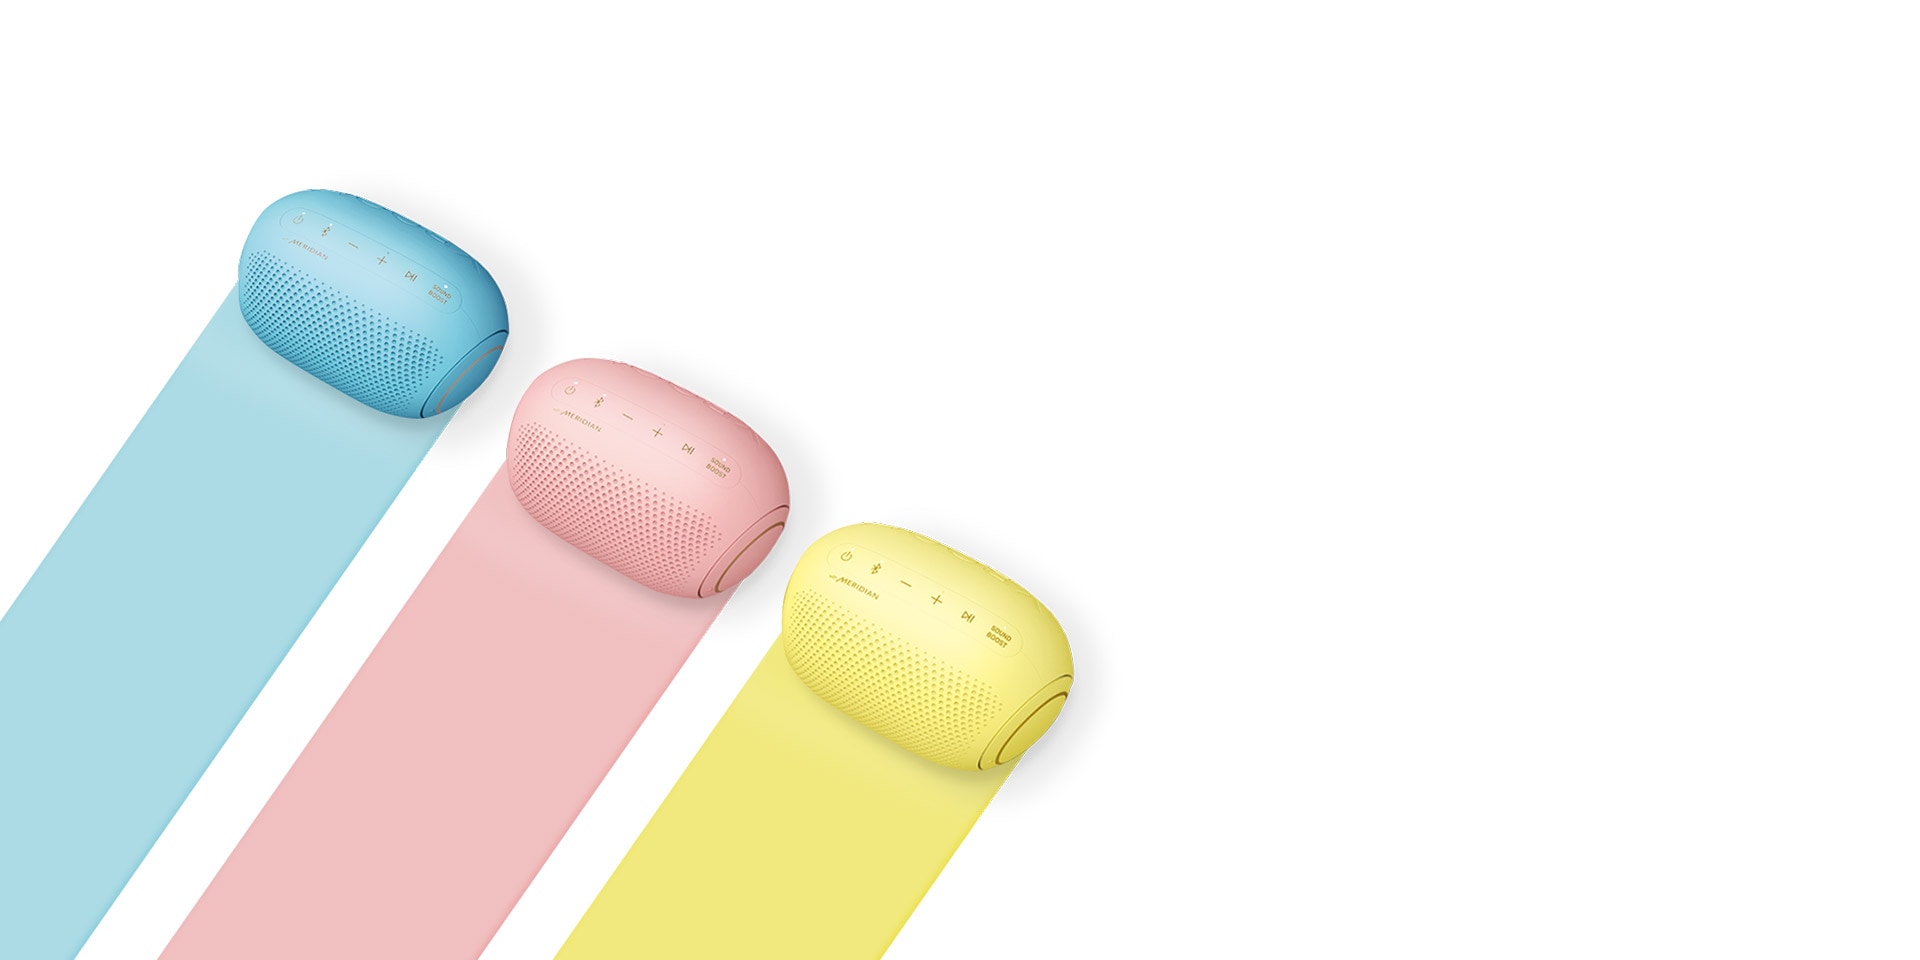 5colors of PL2 Jellybean products